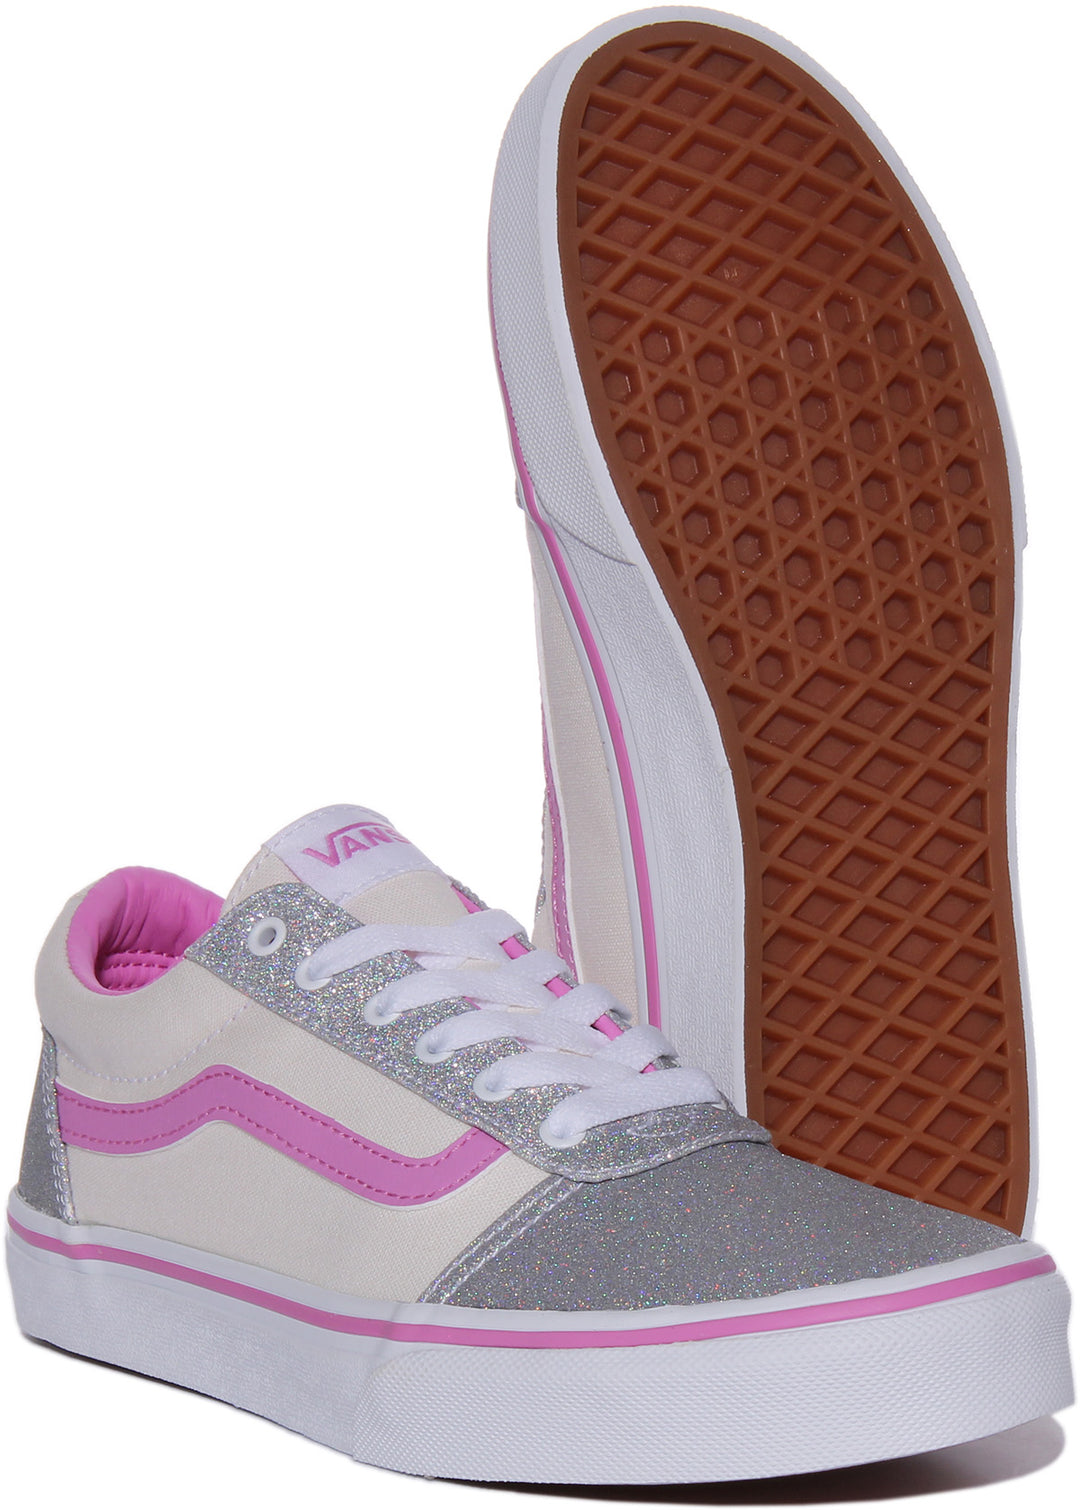 Vans Ward In Pink Silver Glitter For Youth